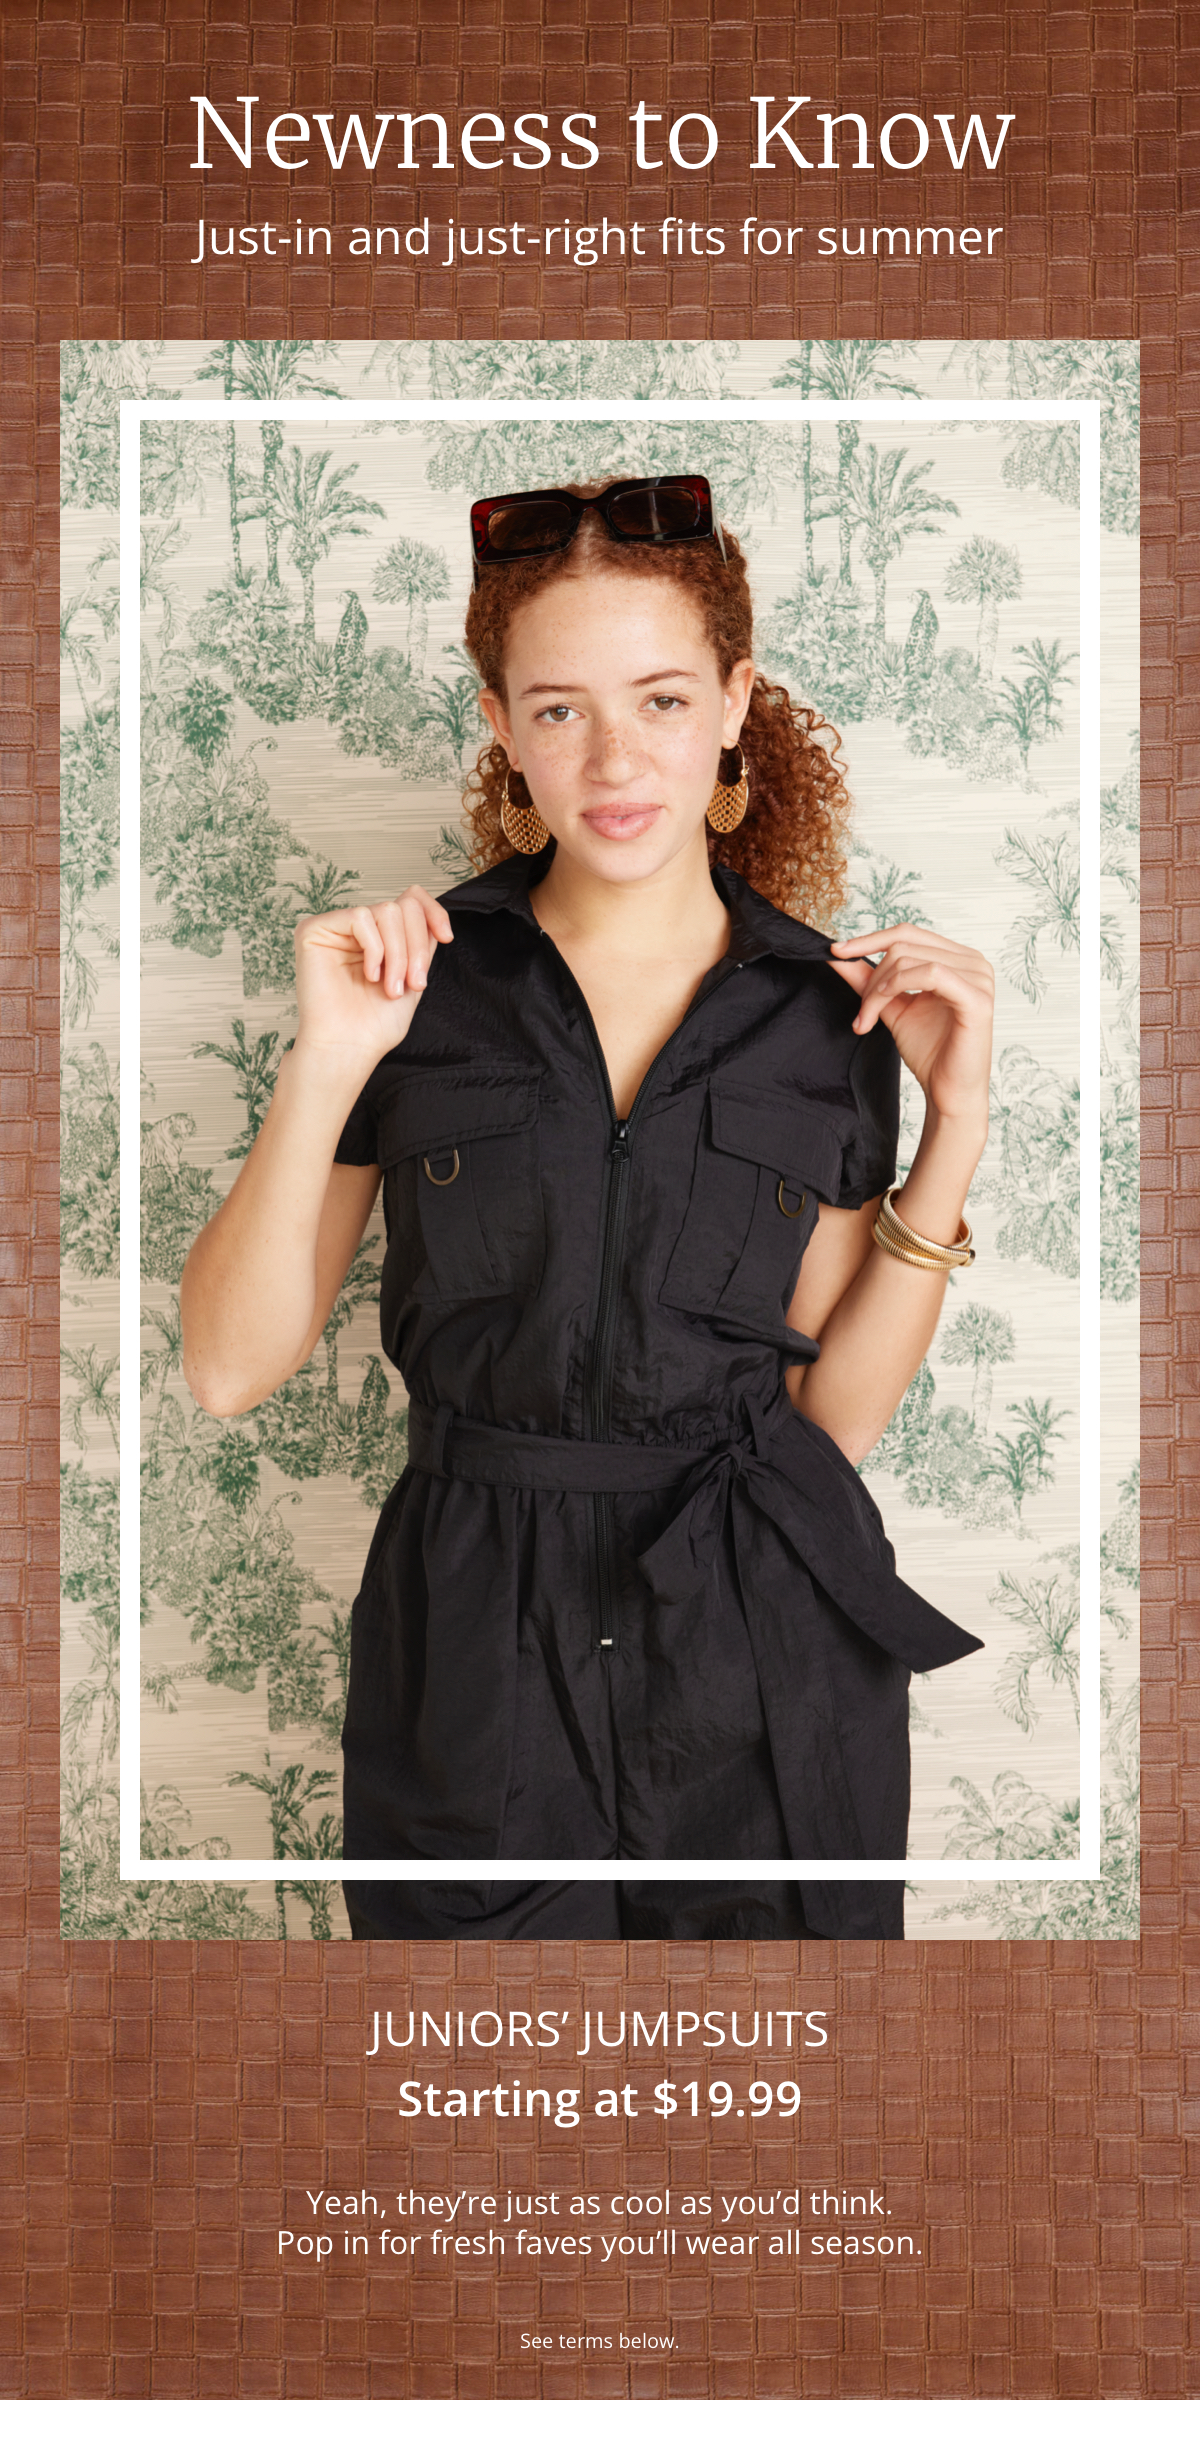 Newness to Know|Just-in and just-right fits for summer|Juniors Jumpsuits|Starting at $19.99|Yeah, theyre just as cool as youd think.|Pop in for fresh faves youll wear all season.|See Terms below